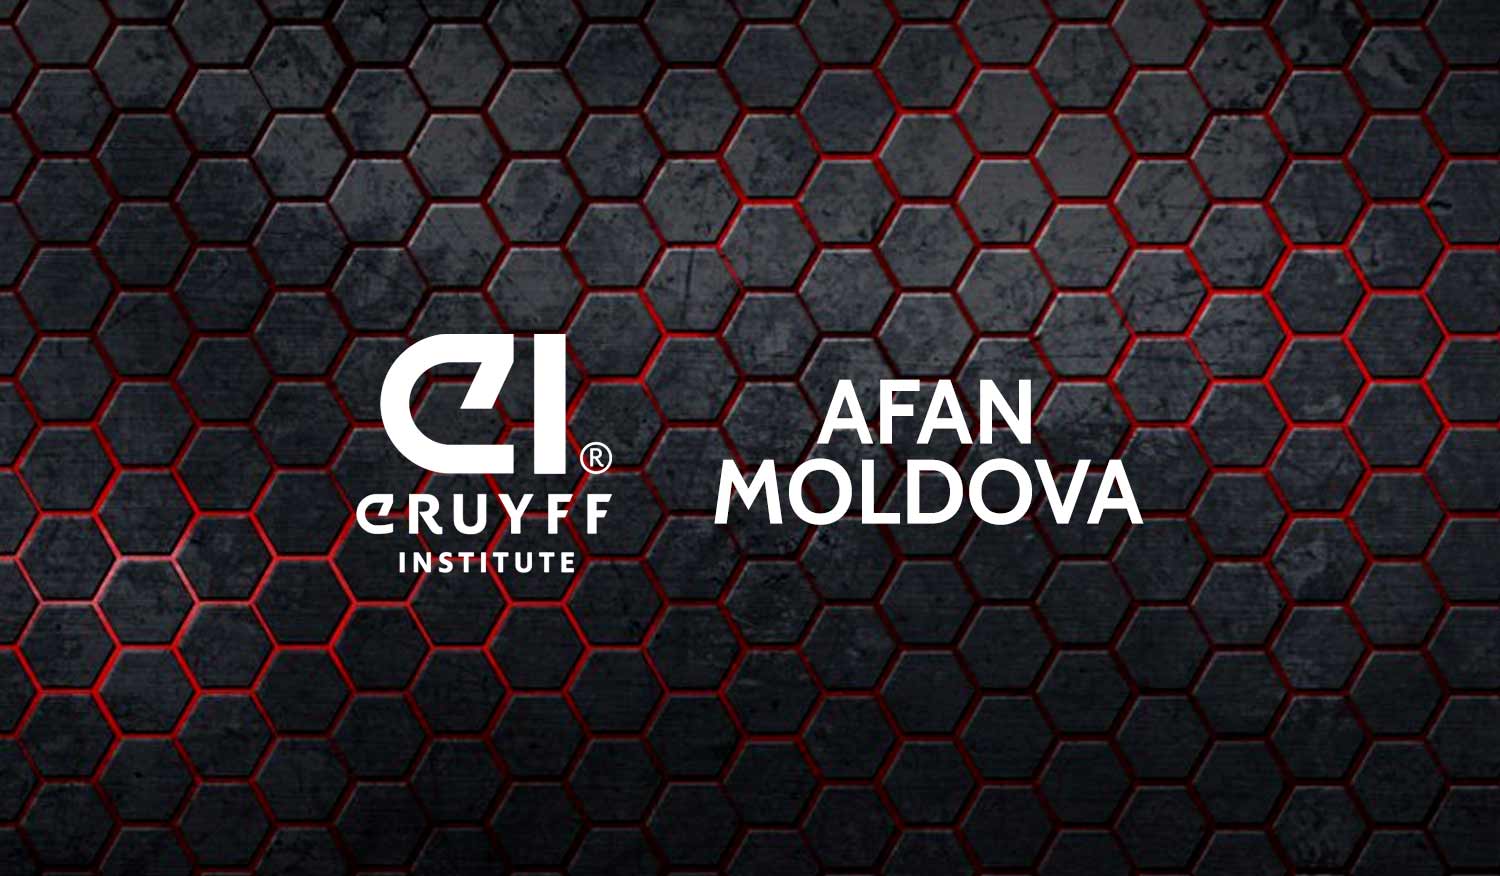 AFAN Moldova signs academic agreement with Johan Cruyff Institute